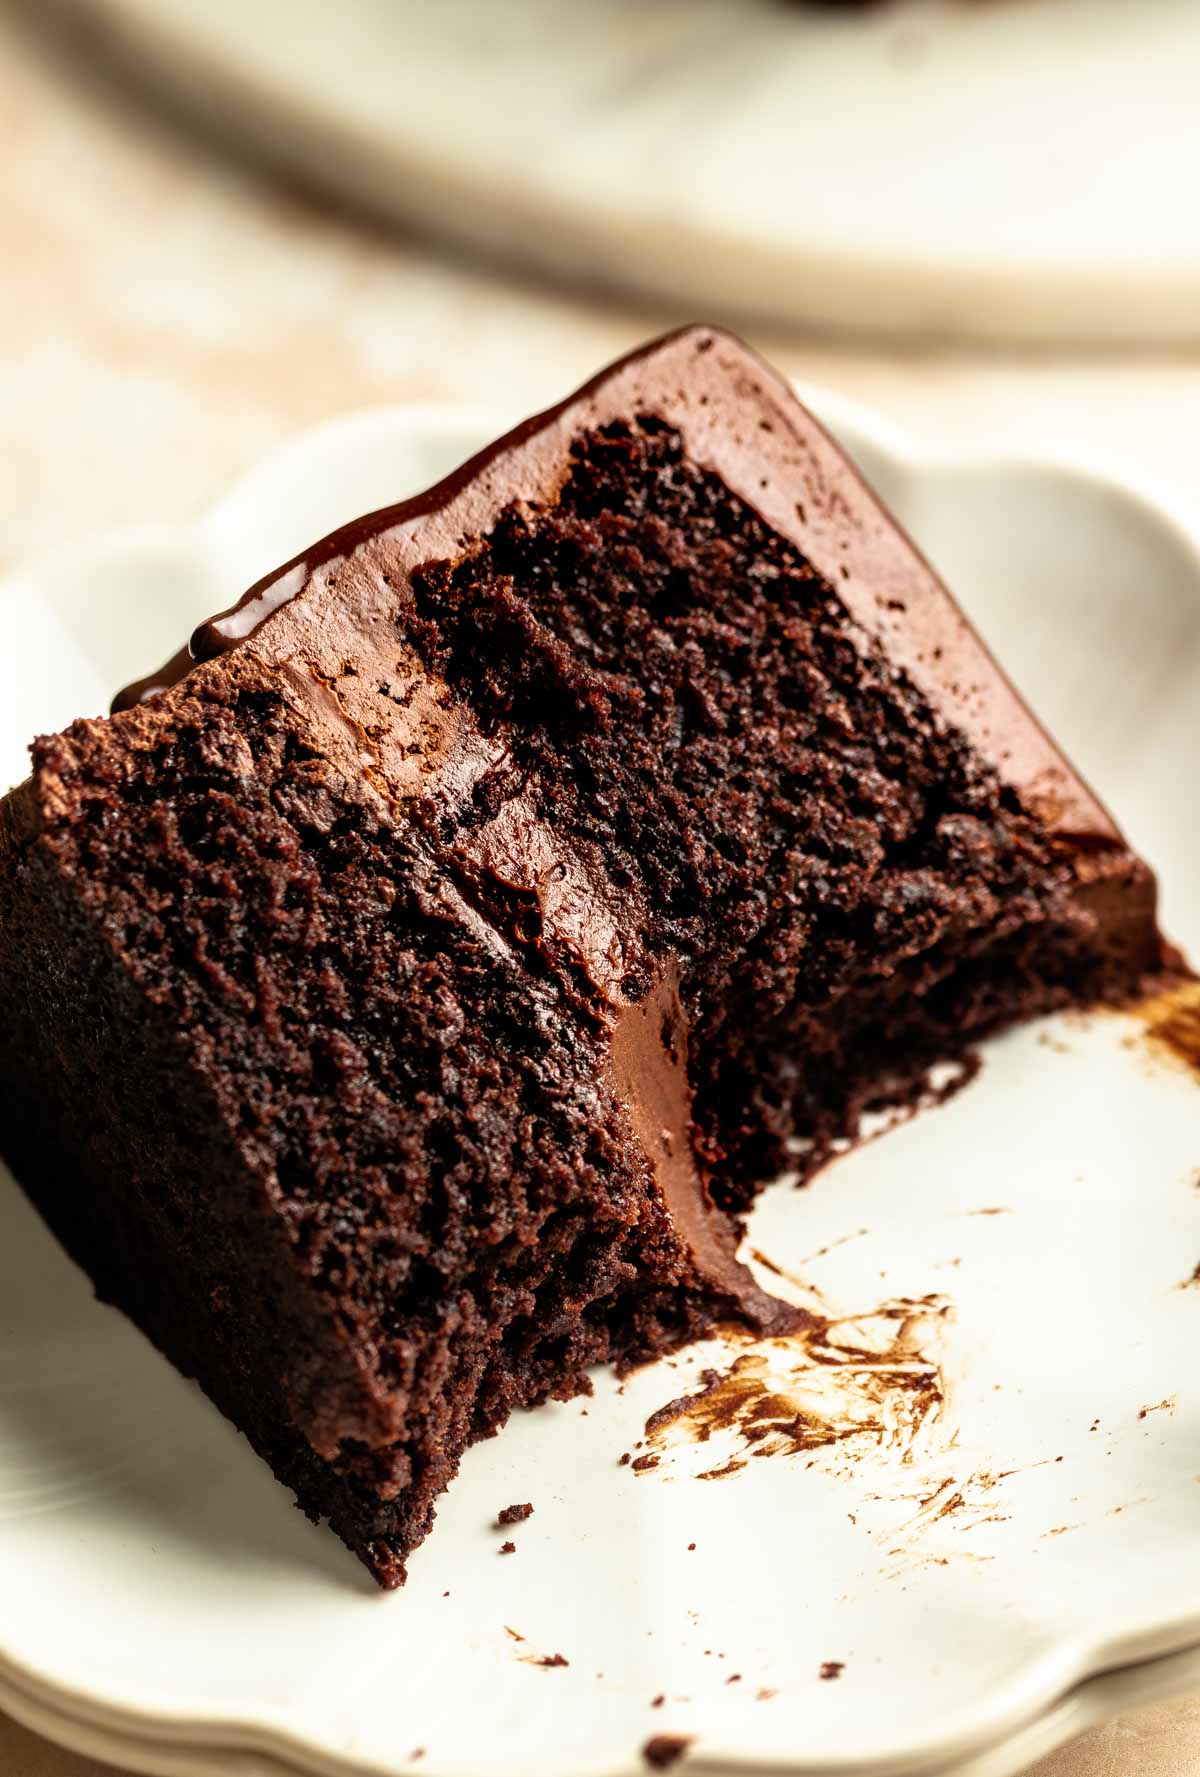 Slice of chocolate ganache cake on a plate with a bite missing.